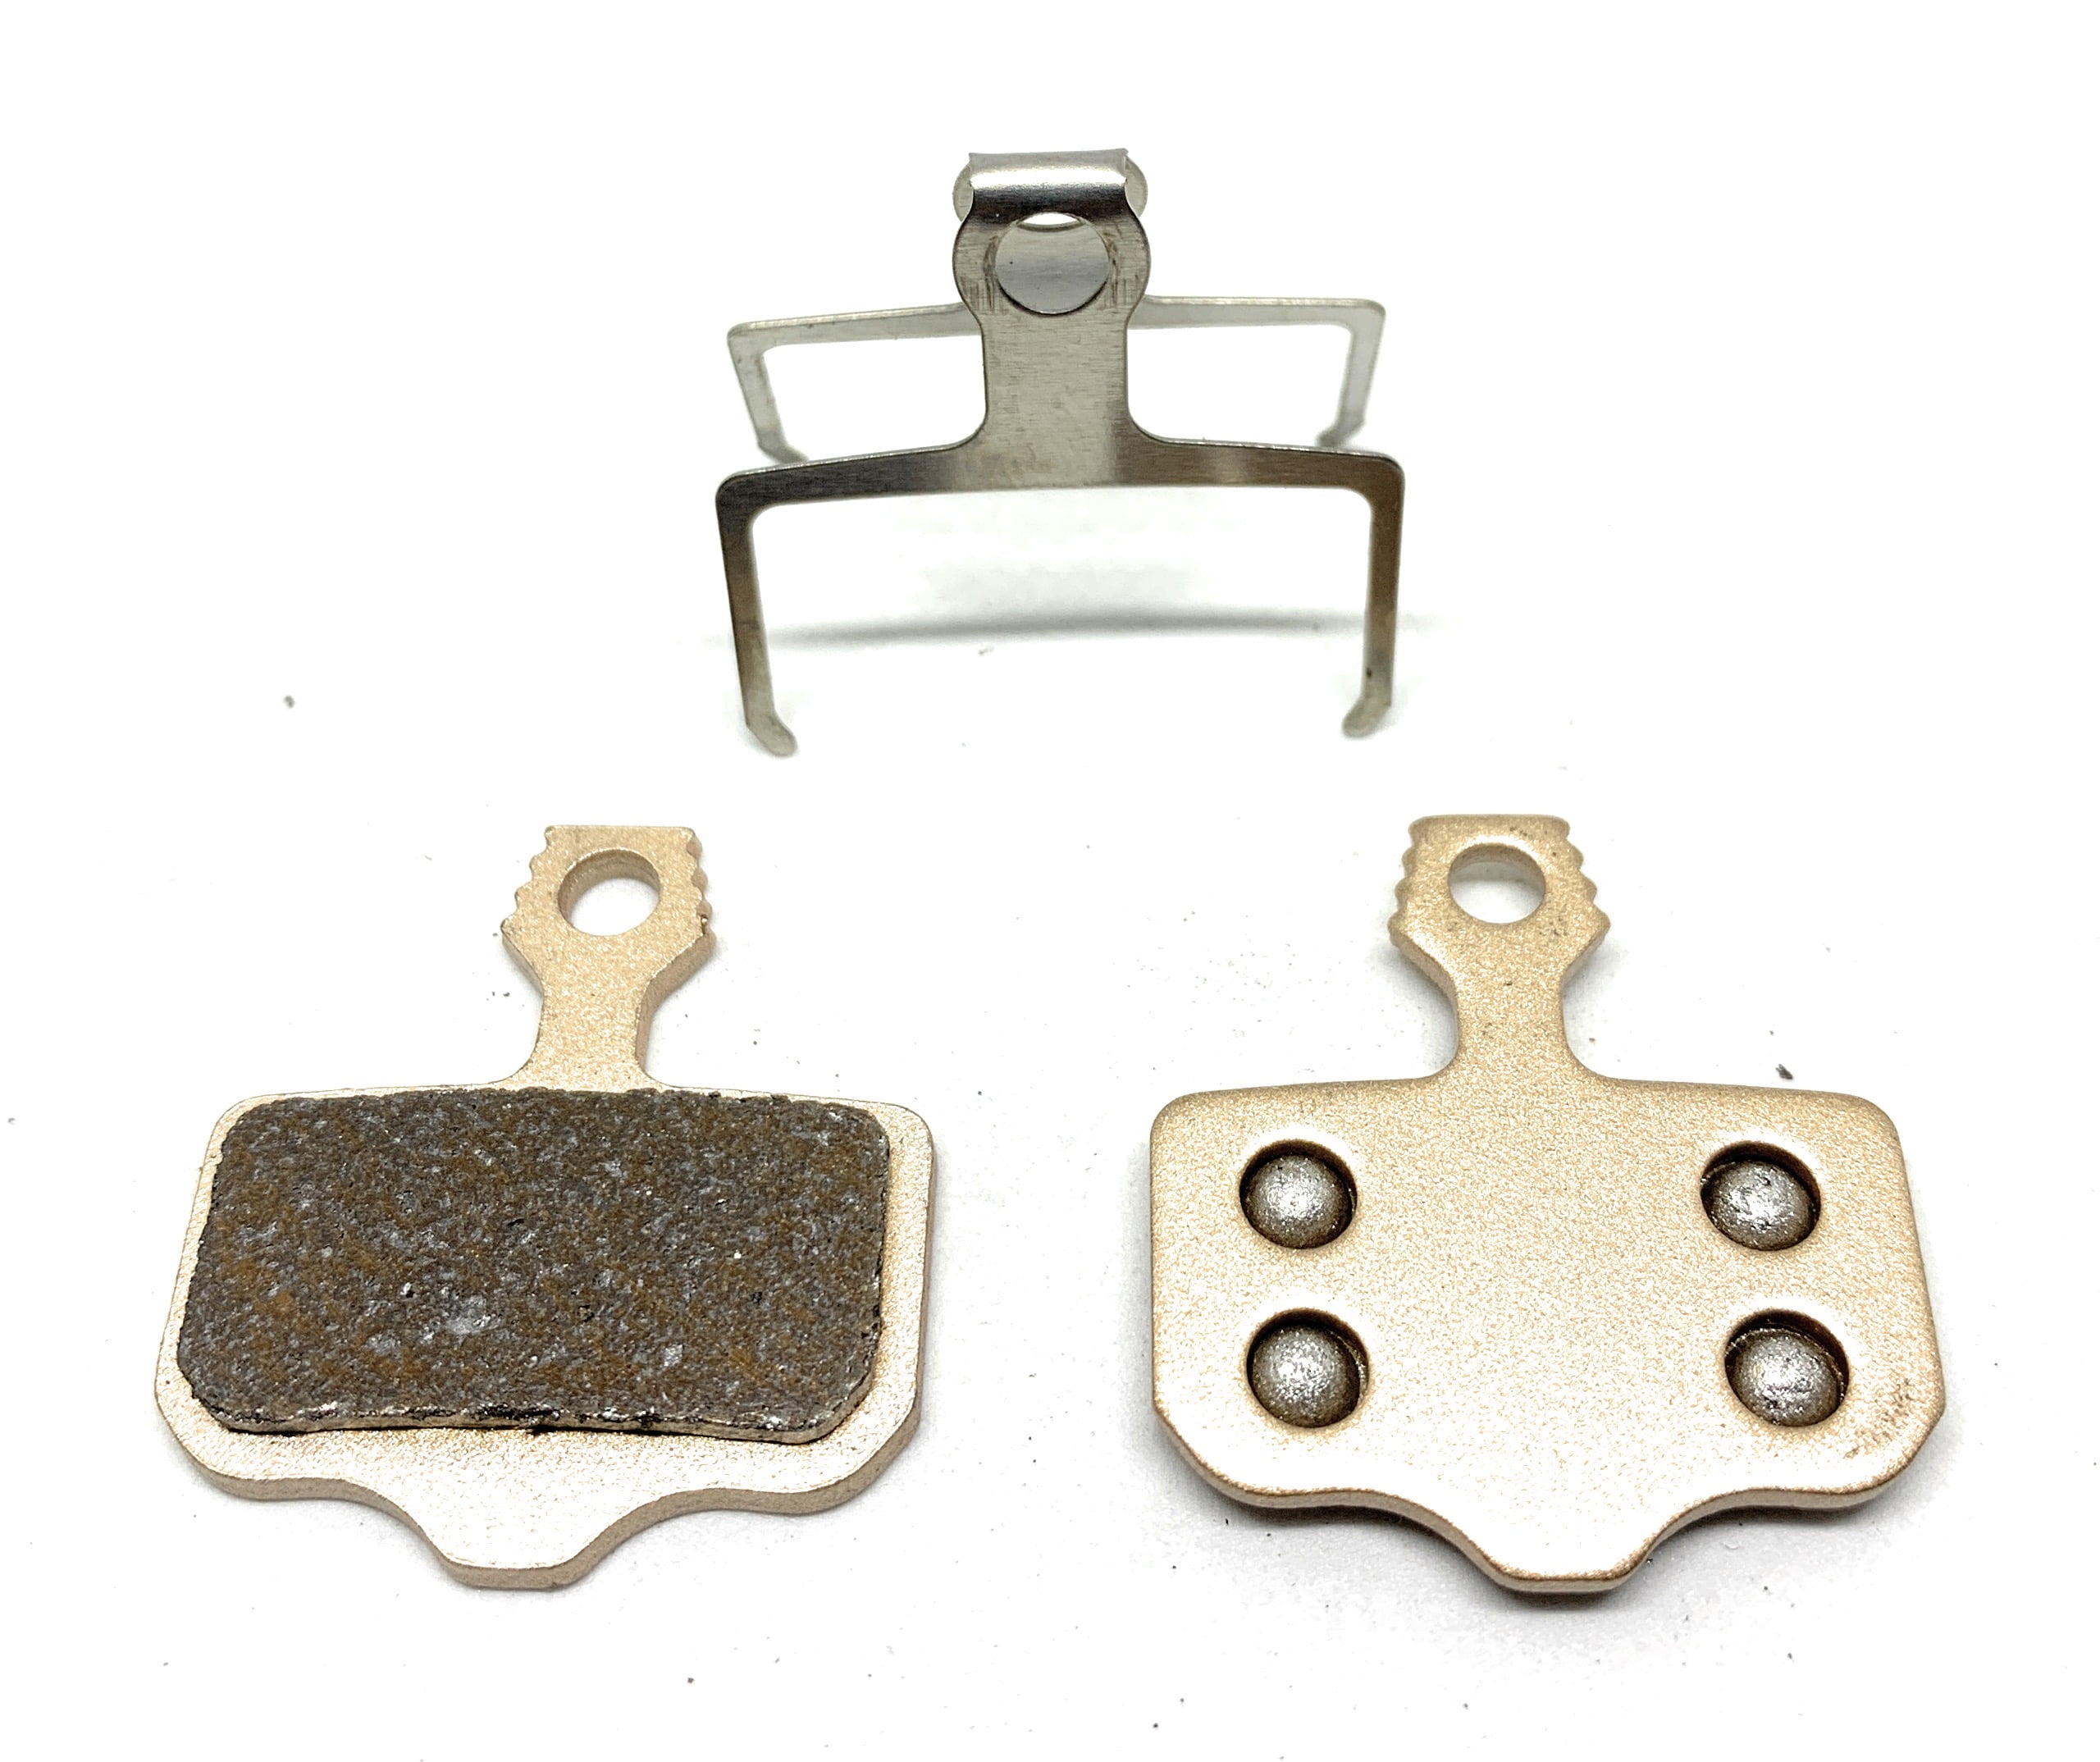 DP Brakes XC PRO X-Country Sintered Disc Brake Pads for Avid Elixer Systems